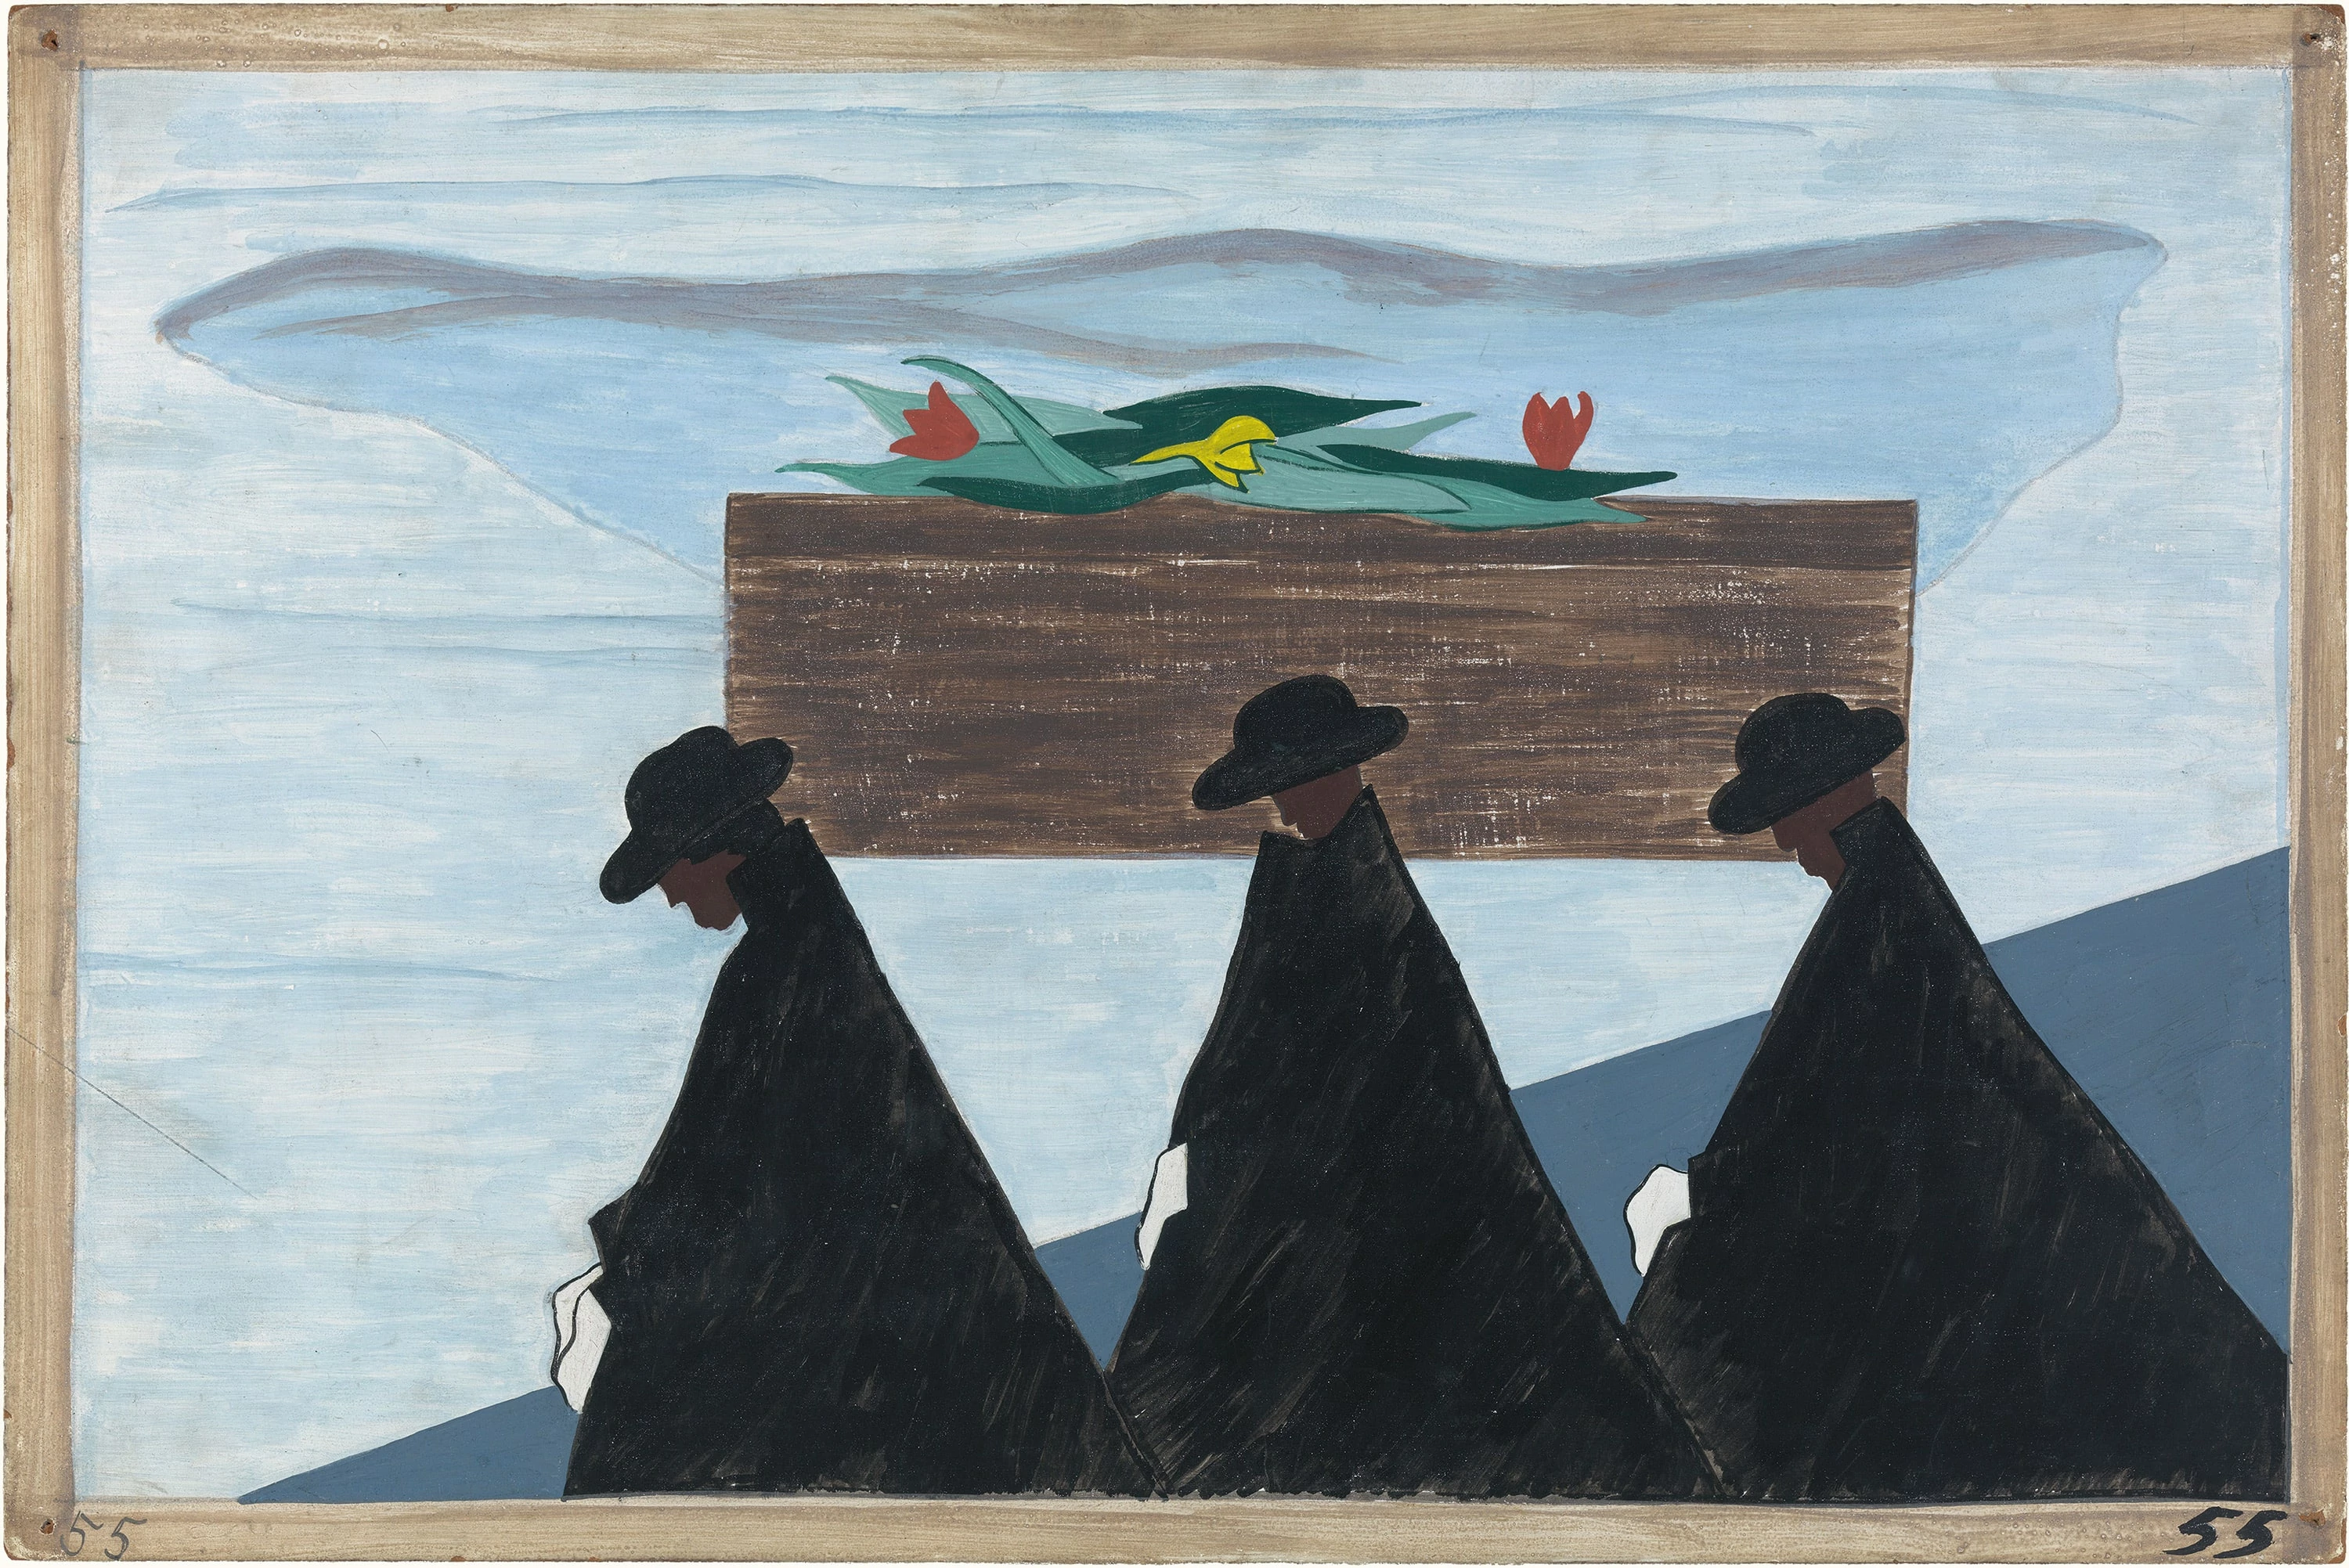 Migration Series No.55: The migrants, having moved suddenly into a crowded and unhealthy environment, soon contracted tuberculosis. The death rate rose, Jacob Lawrence